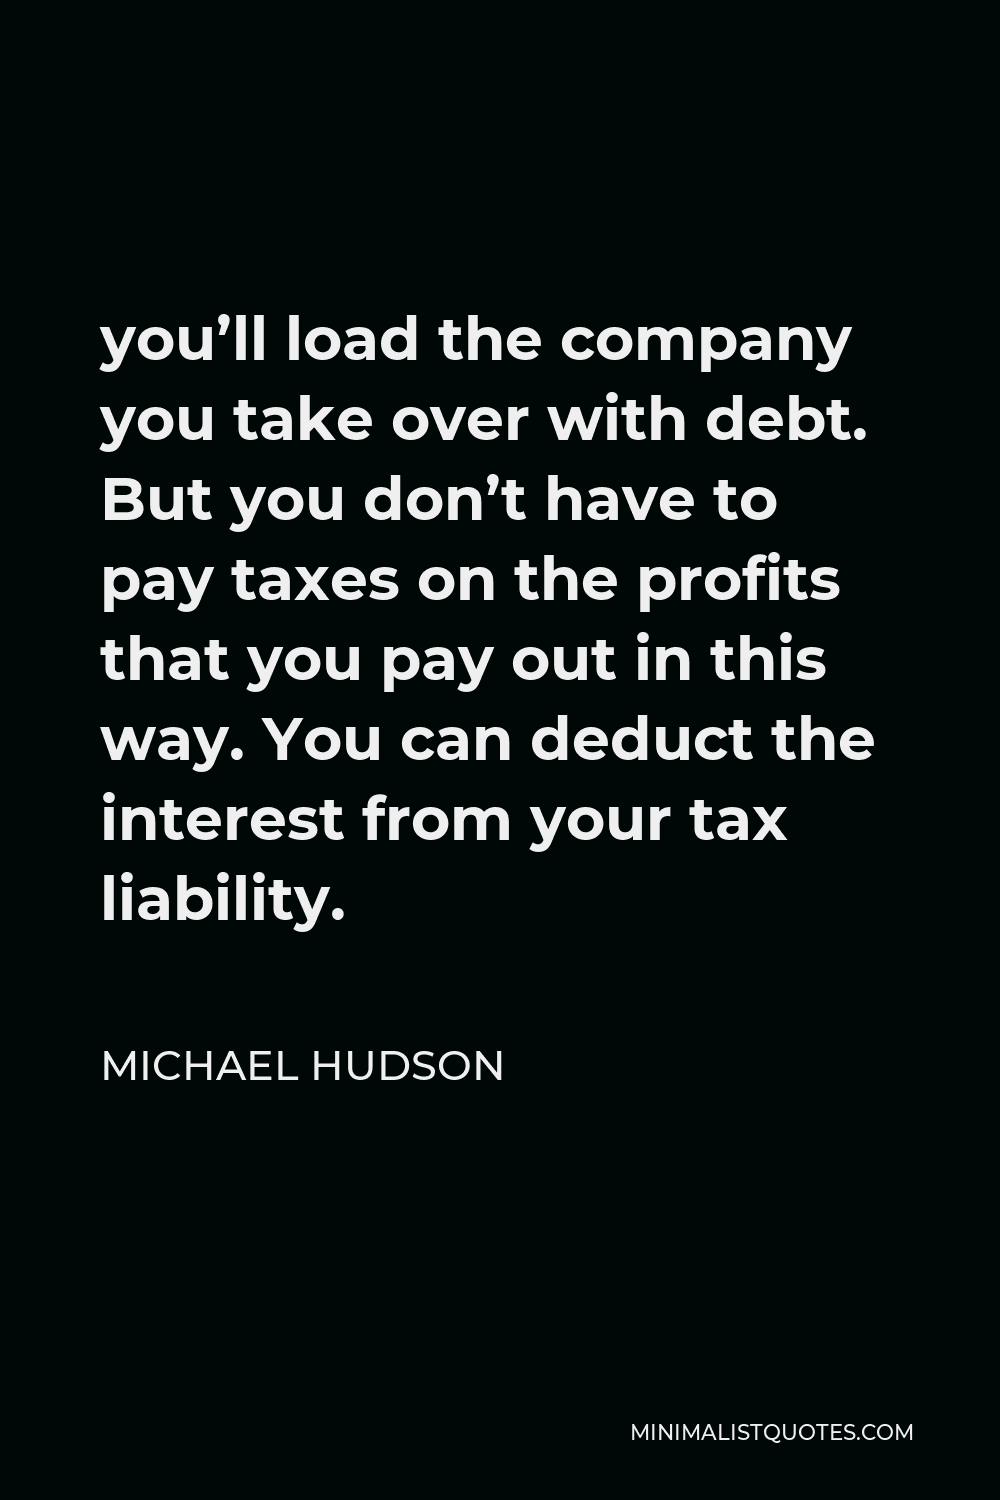 Michael Hudson Quote - you’ll load the company you take over with debt. But you don’t have to pay taxes on the profits that you pay out in this way. You can deduct the interest from your tax liability.